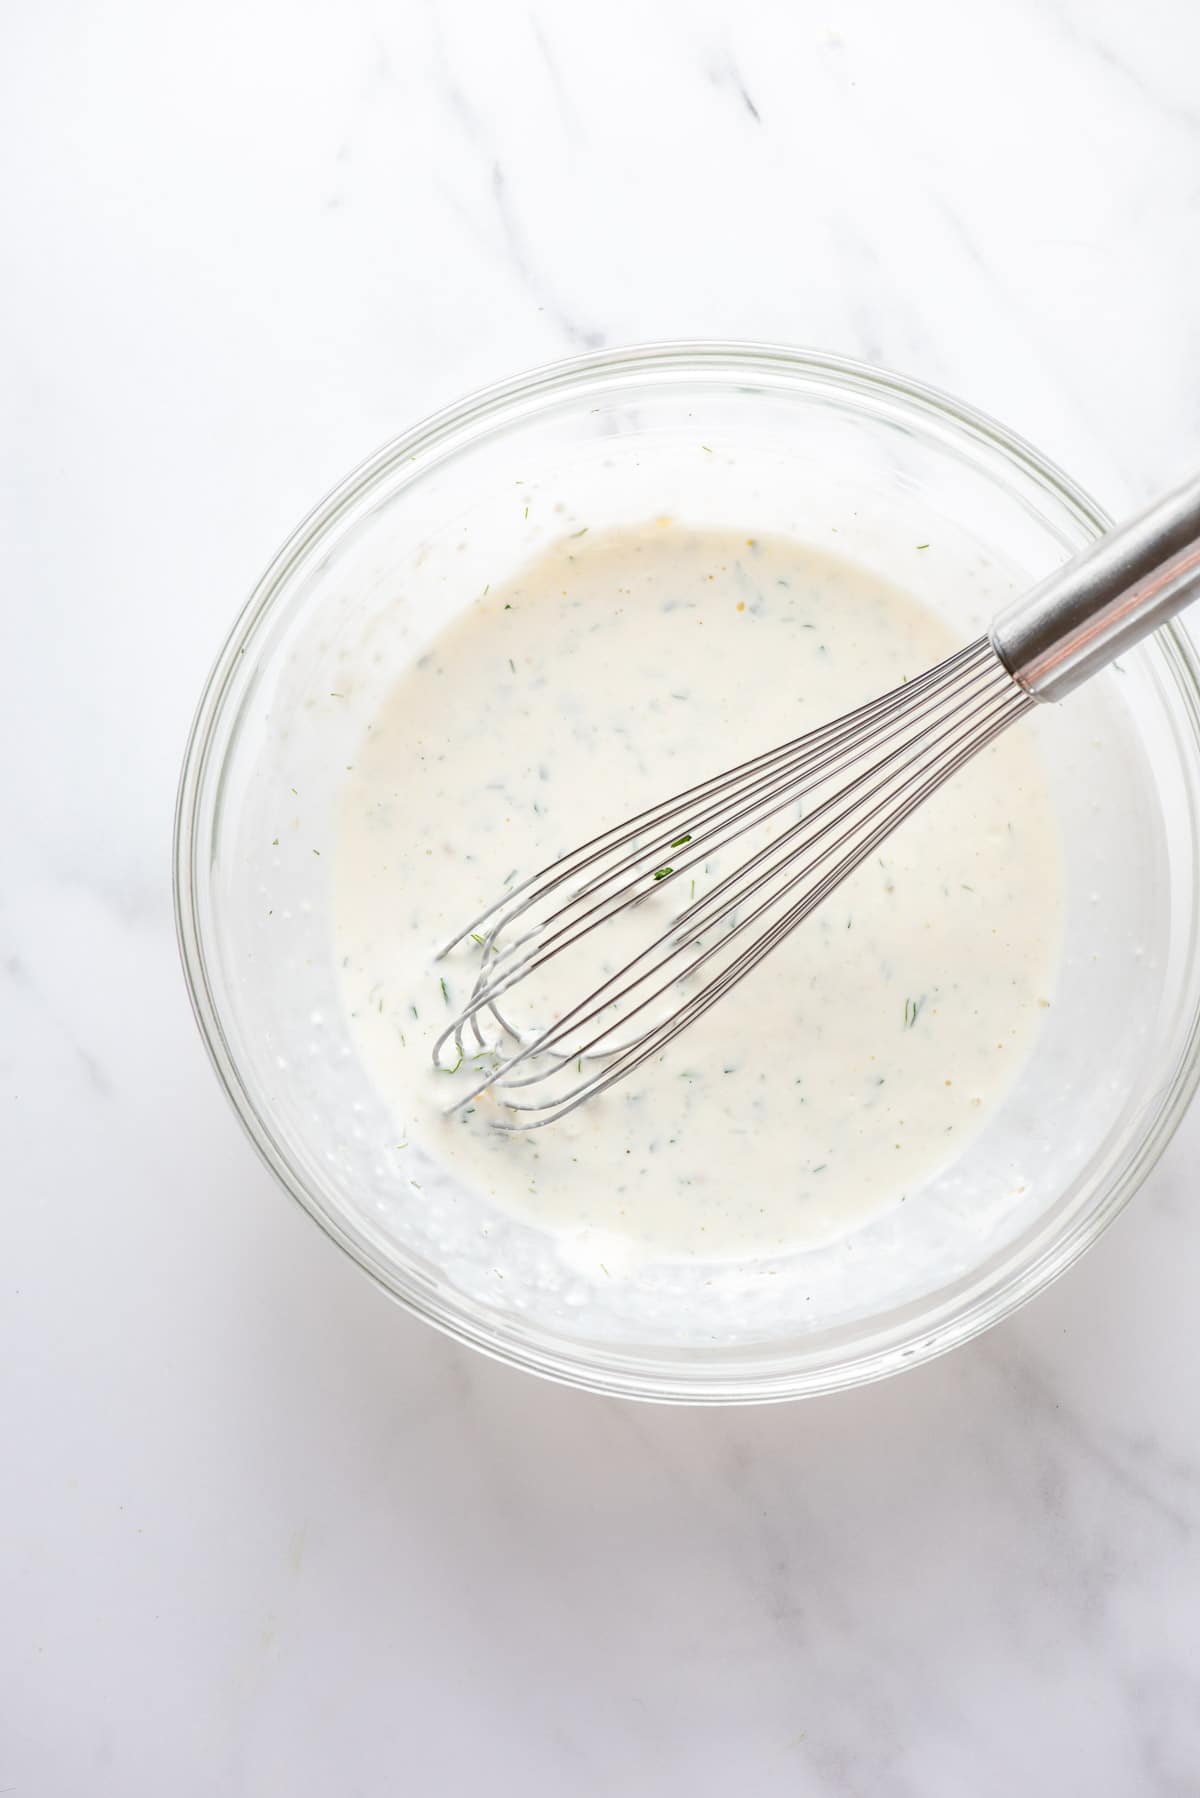 buttermilk ranch dressing just whisked in a glass mixing bowl